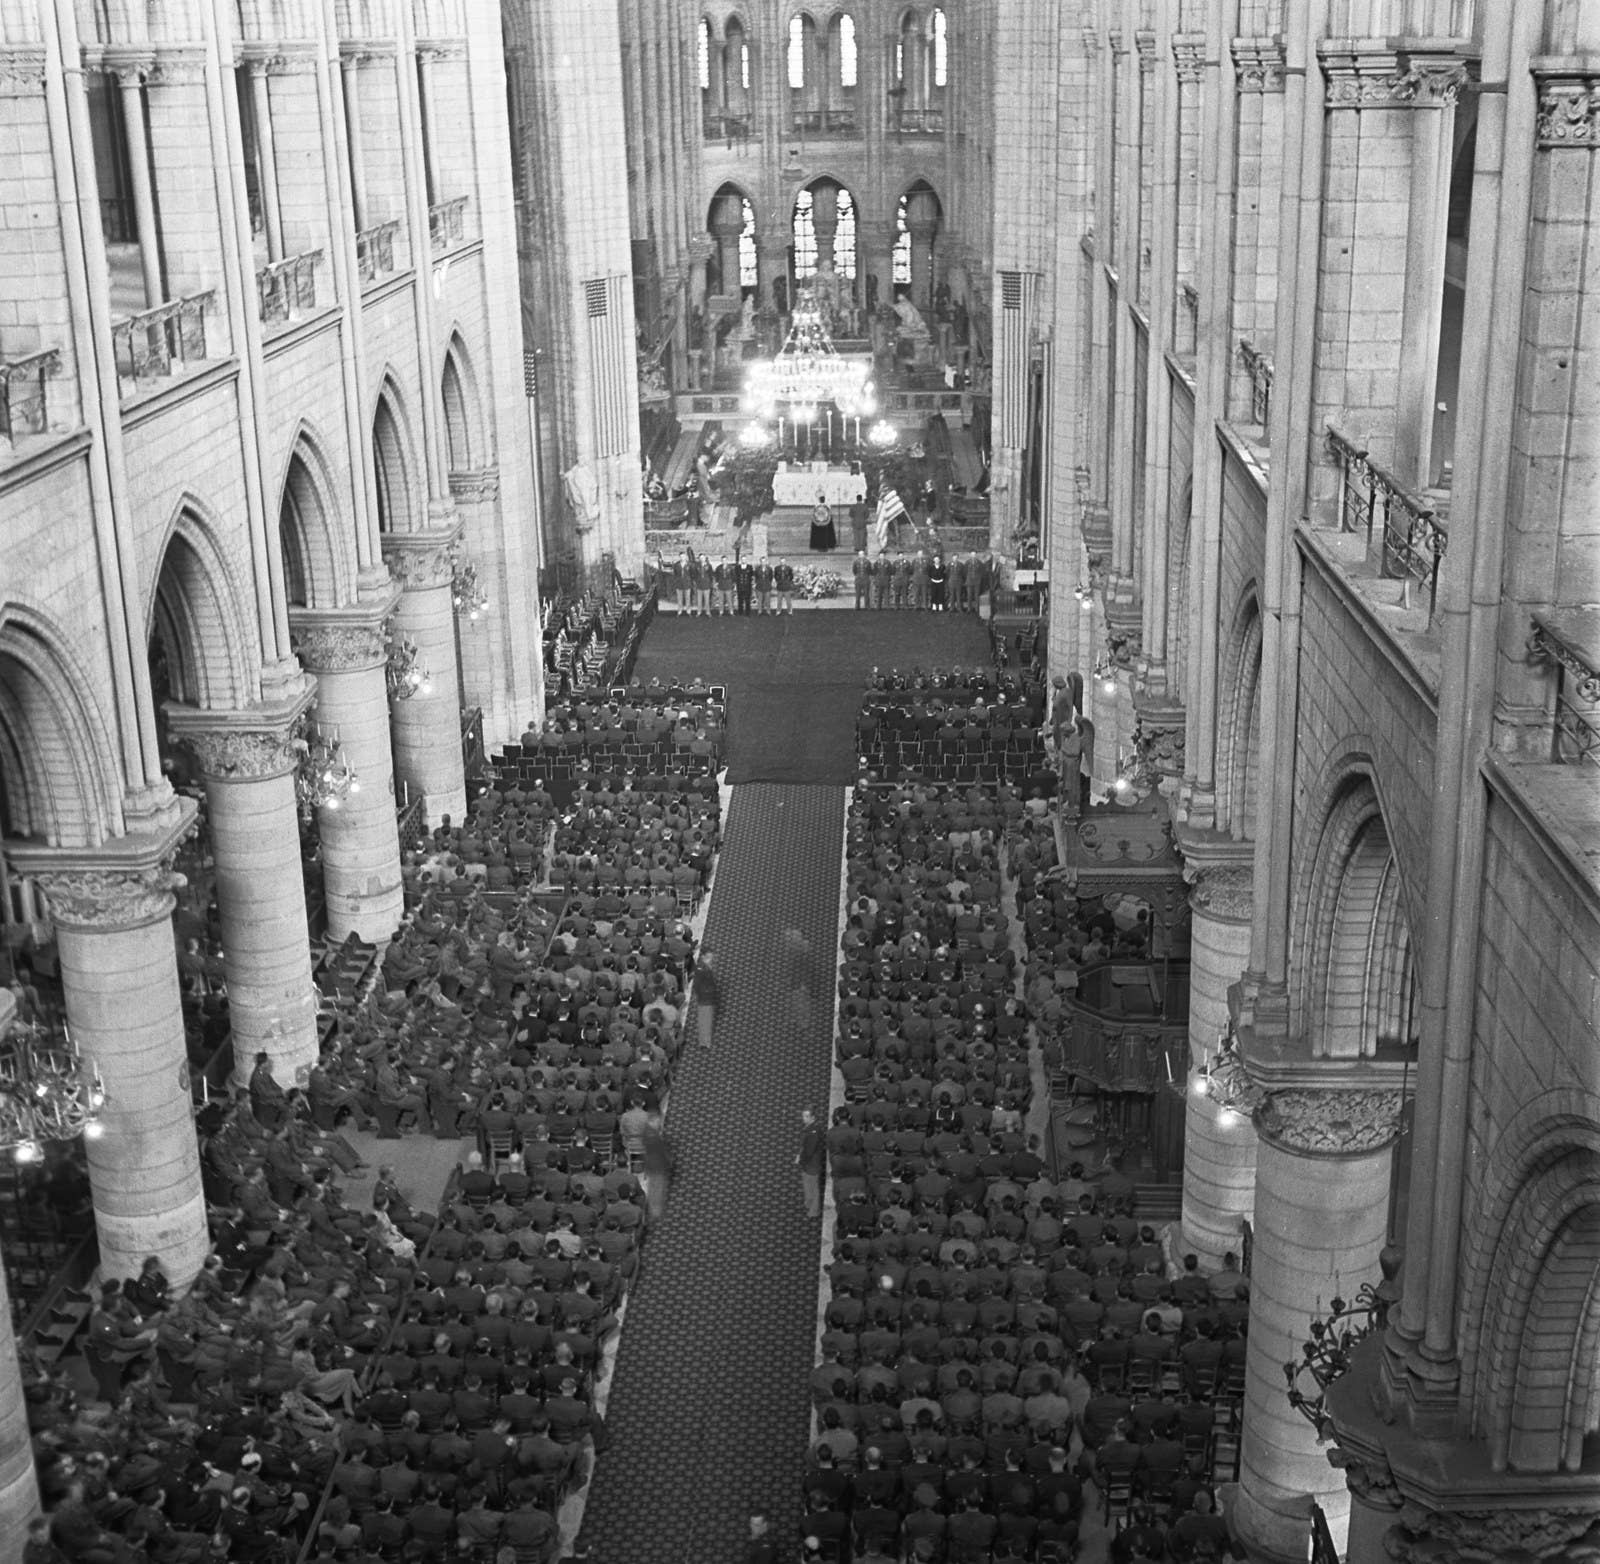 U.S. soldiers fill the pews of Notre Dame Cathedral during the GI memorial service for US President Roosevelt on April 16, 1945.